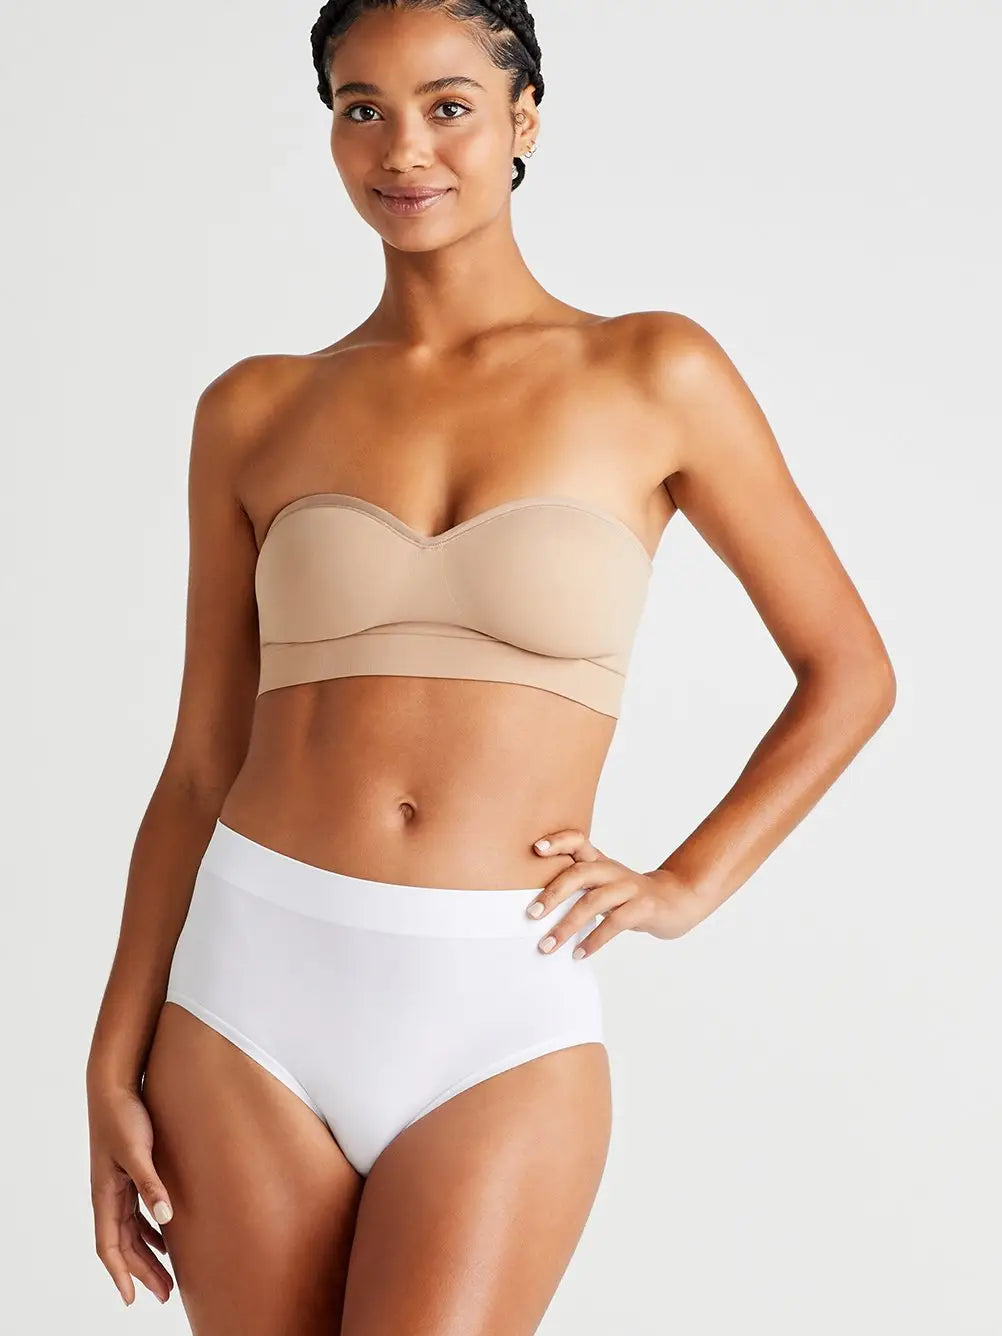 Soiree Longline Bustier Convertible Bra Natural 32C by Le Mystere